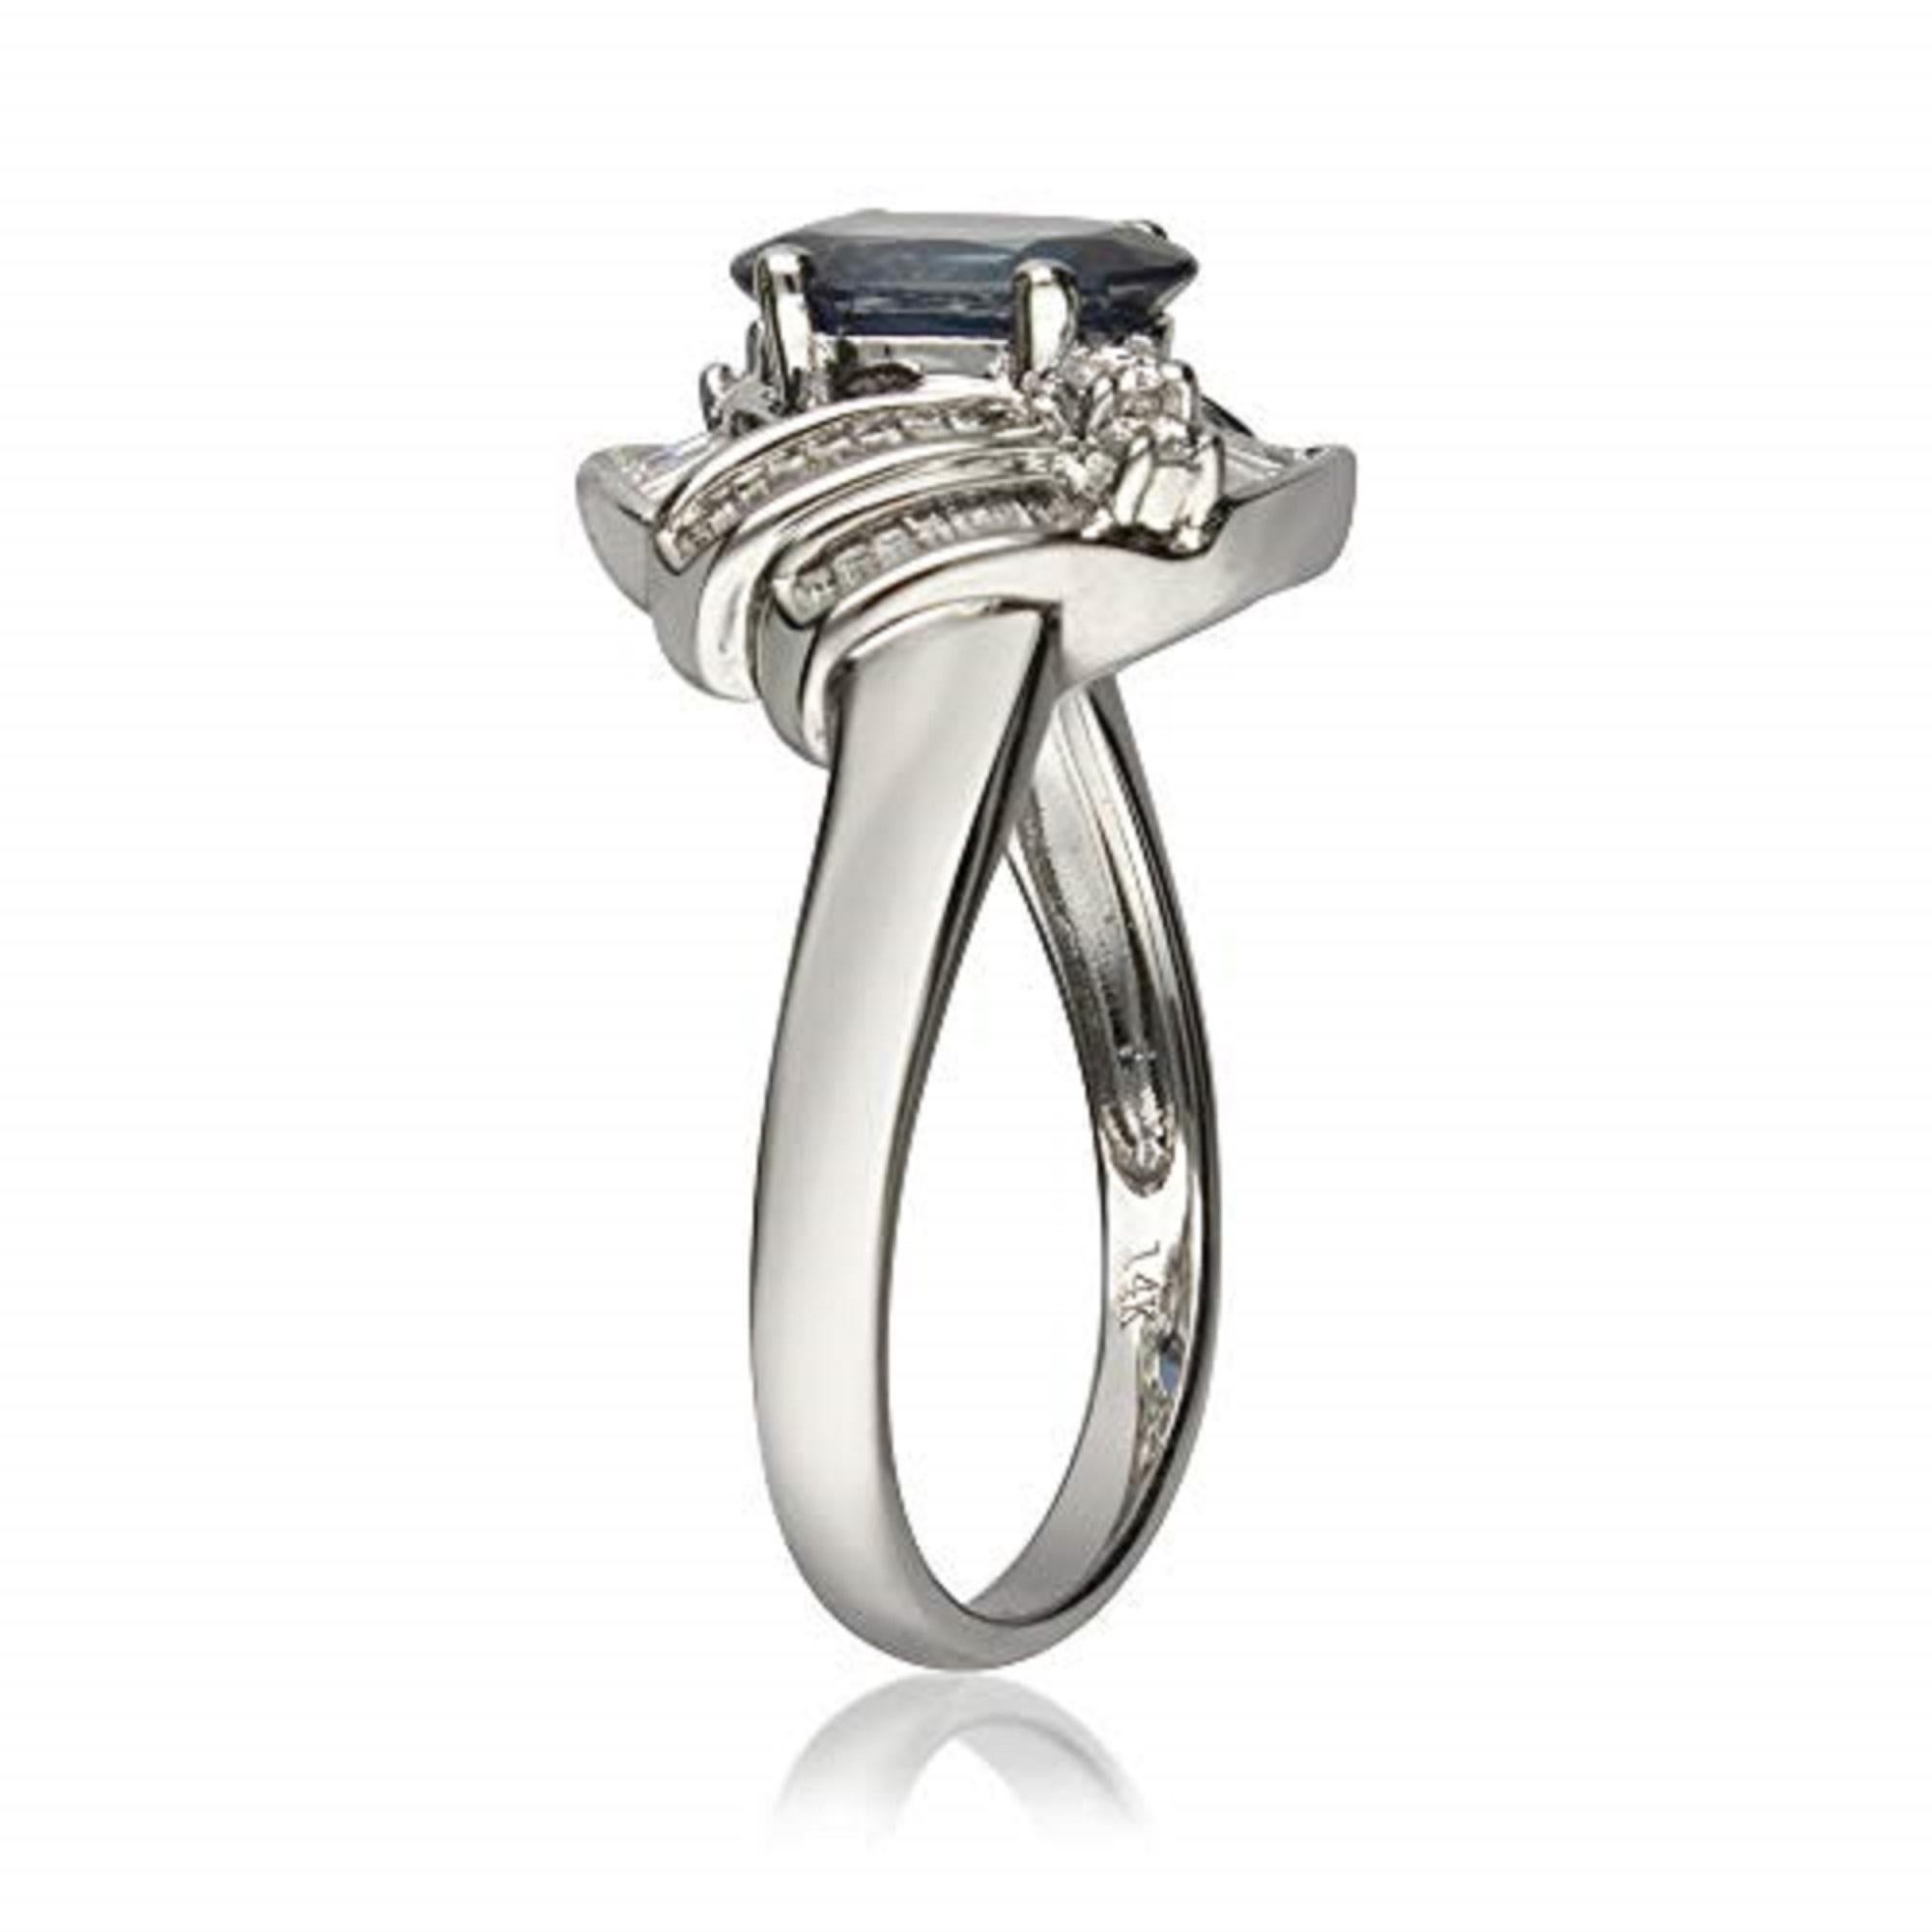 Stunning, timeless and classy eternity Unique ring. Decorate yourself in luxury with this Gin & Grace ring. The 14K White Gold jewelry boasts Oval-Cut Prong Setting Genuine Blue Sapphire (1 pcs) 1.47 Carat, Baguette- Shape Natural Diamond (42 Pcs)